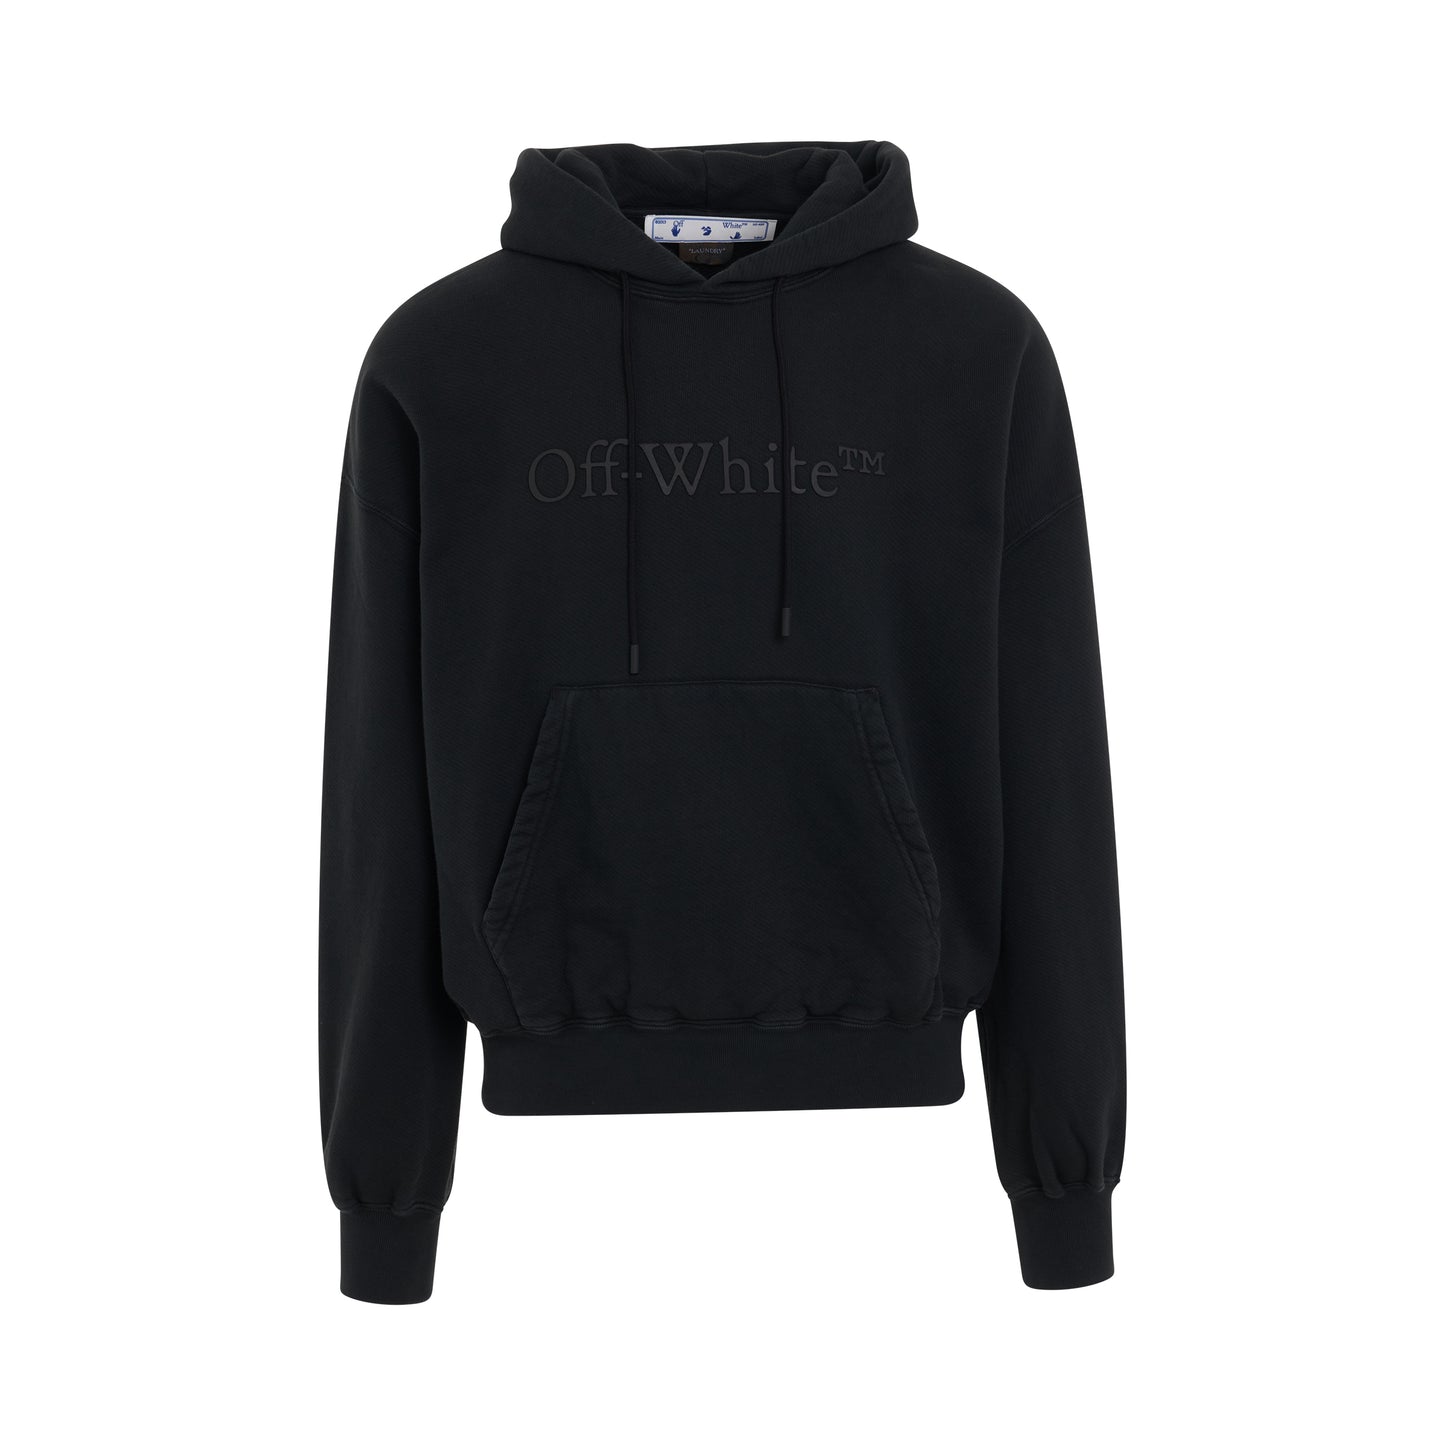 Bookish Laundry Boxy Hoodie in Black